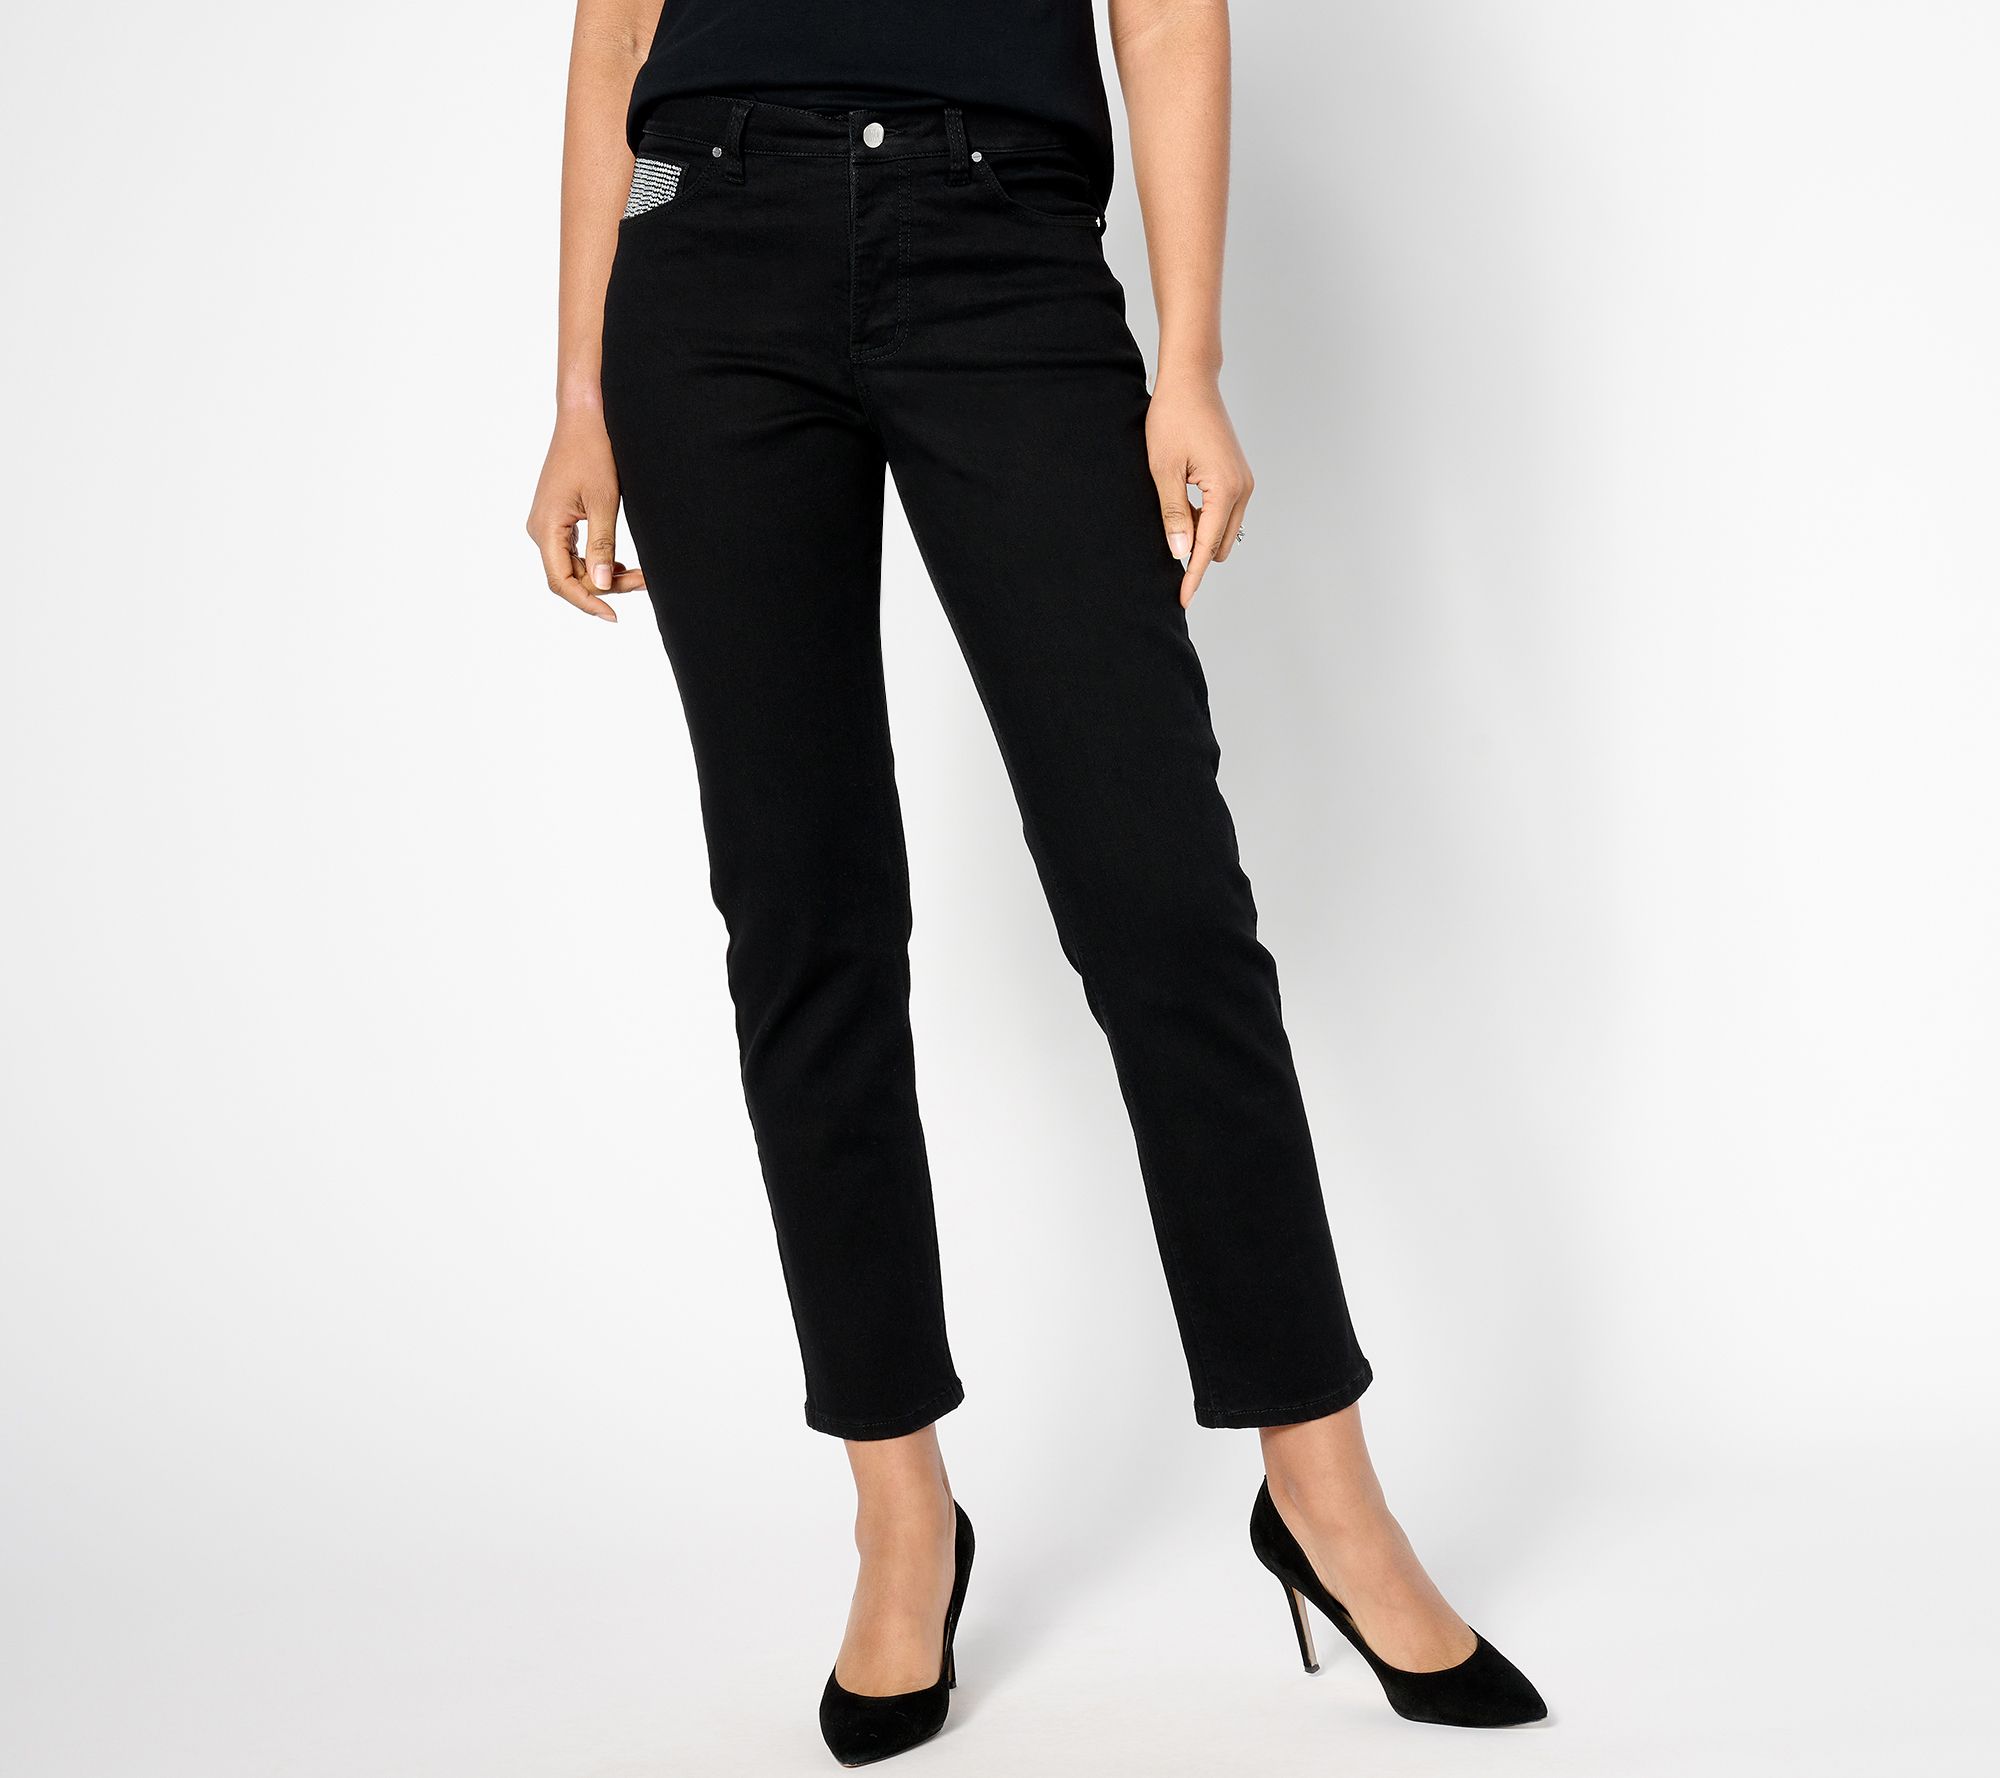 Women with Control - Jeans - Pants 